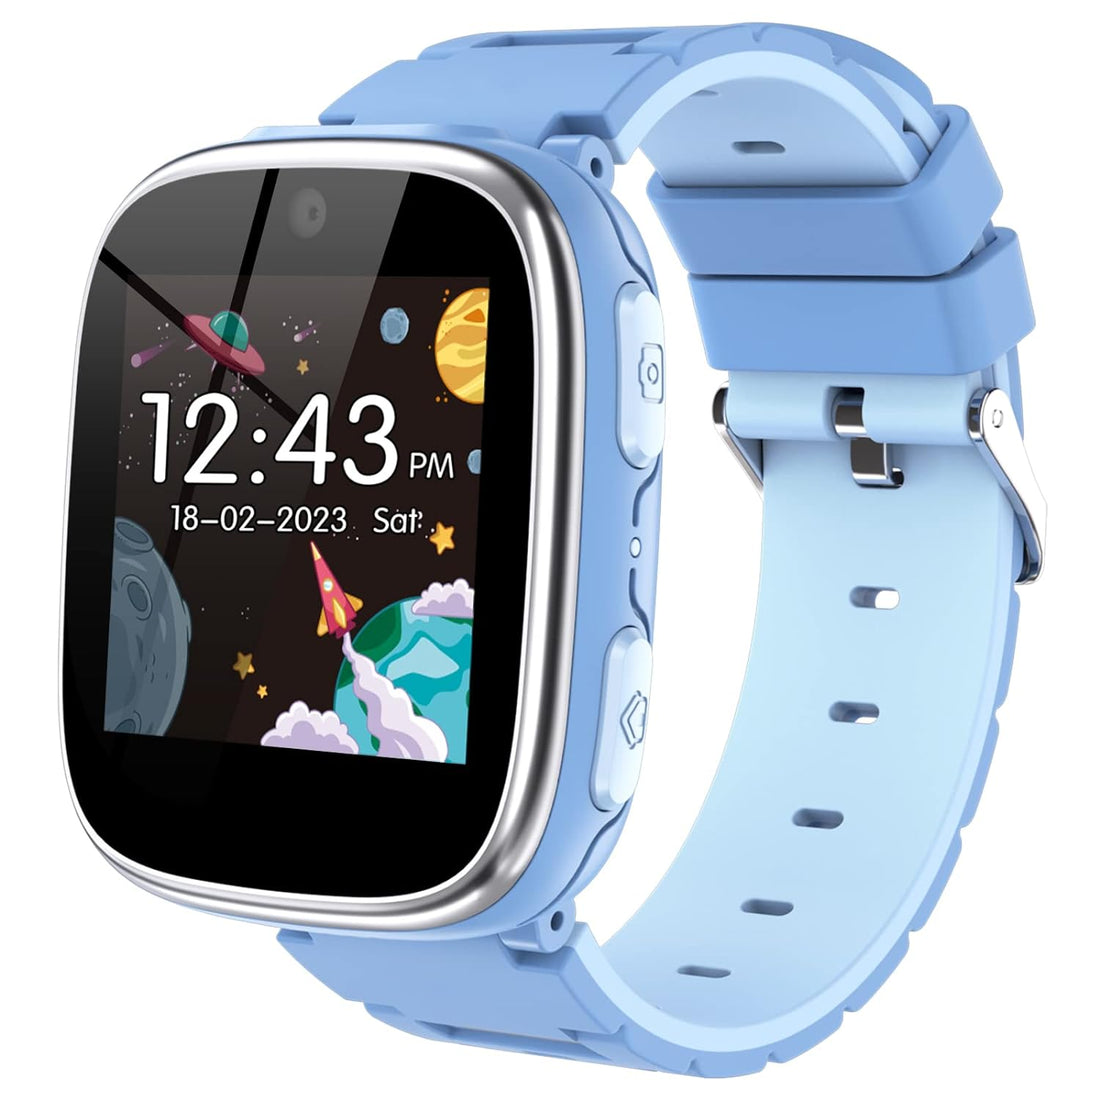 Kids Smart Watch Girls Boys - Smart Watch for Kids Game Smart Watch Gifts for 4-12 Years Old with 26 Games Camera Alarm Video Music Player Pedometer Flashlight Birthday Gift for Boys Girls (Blue)